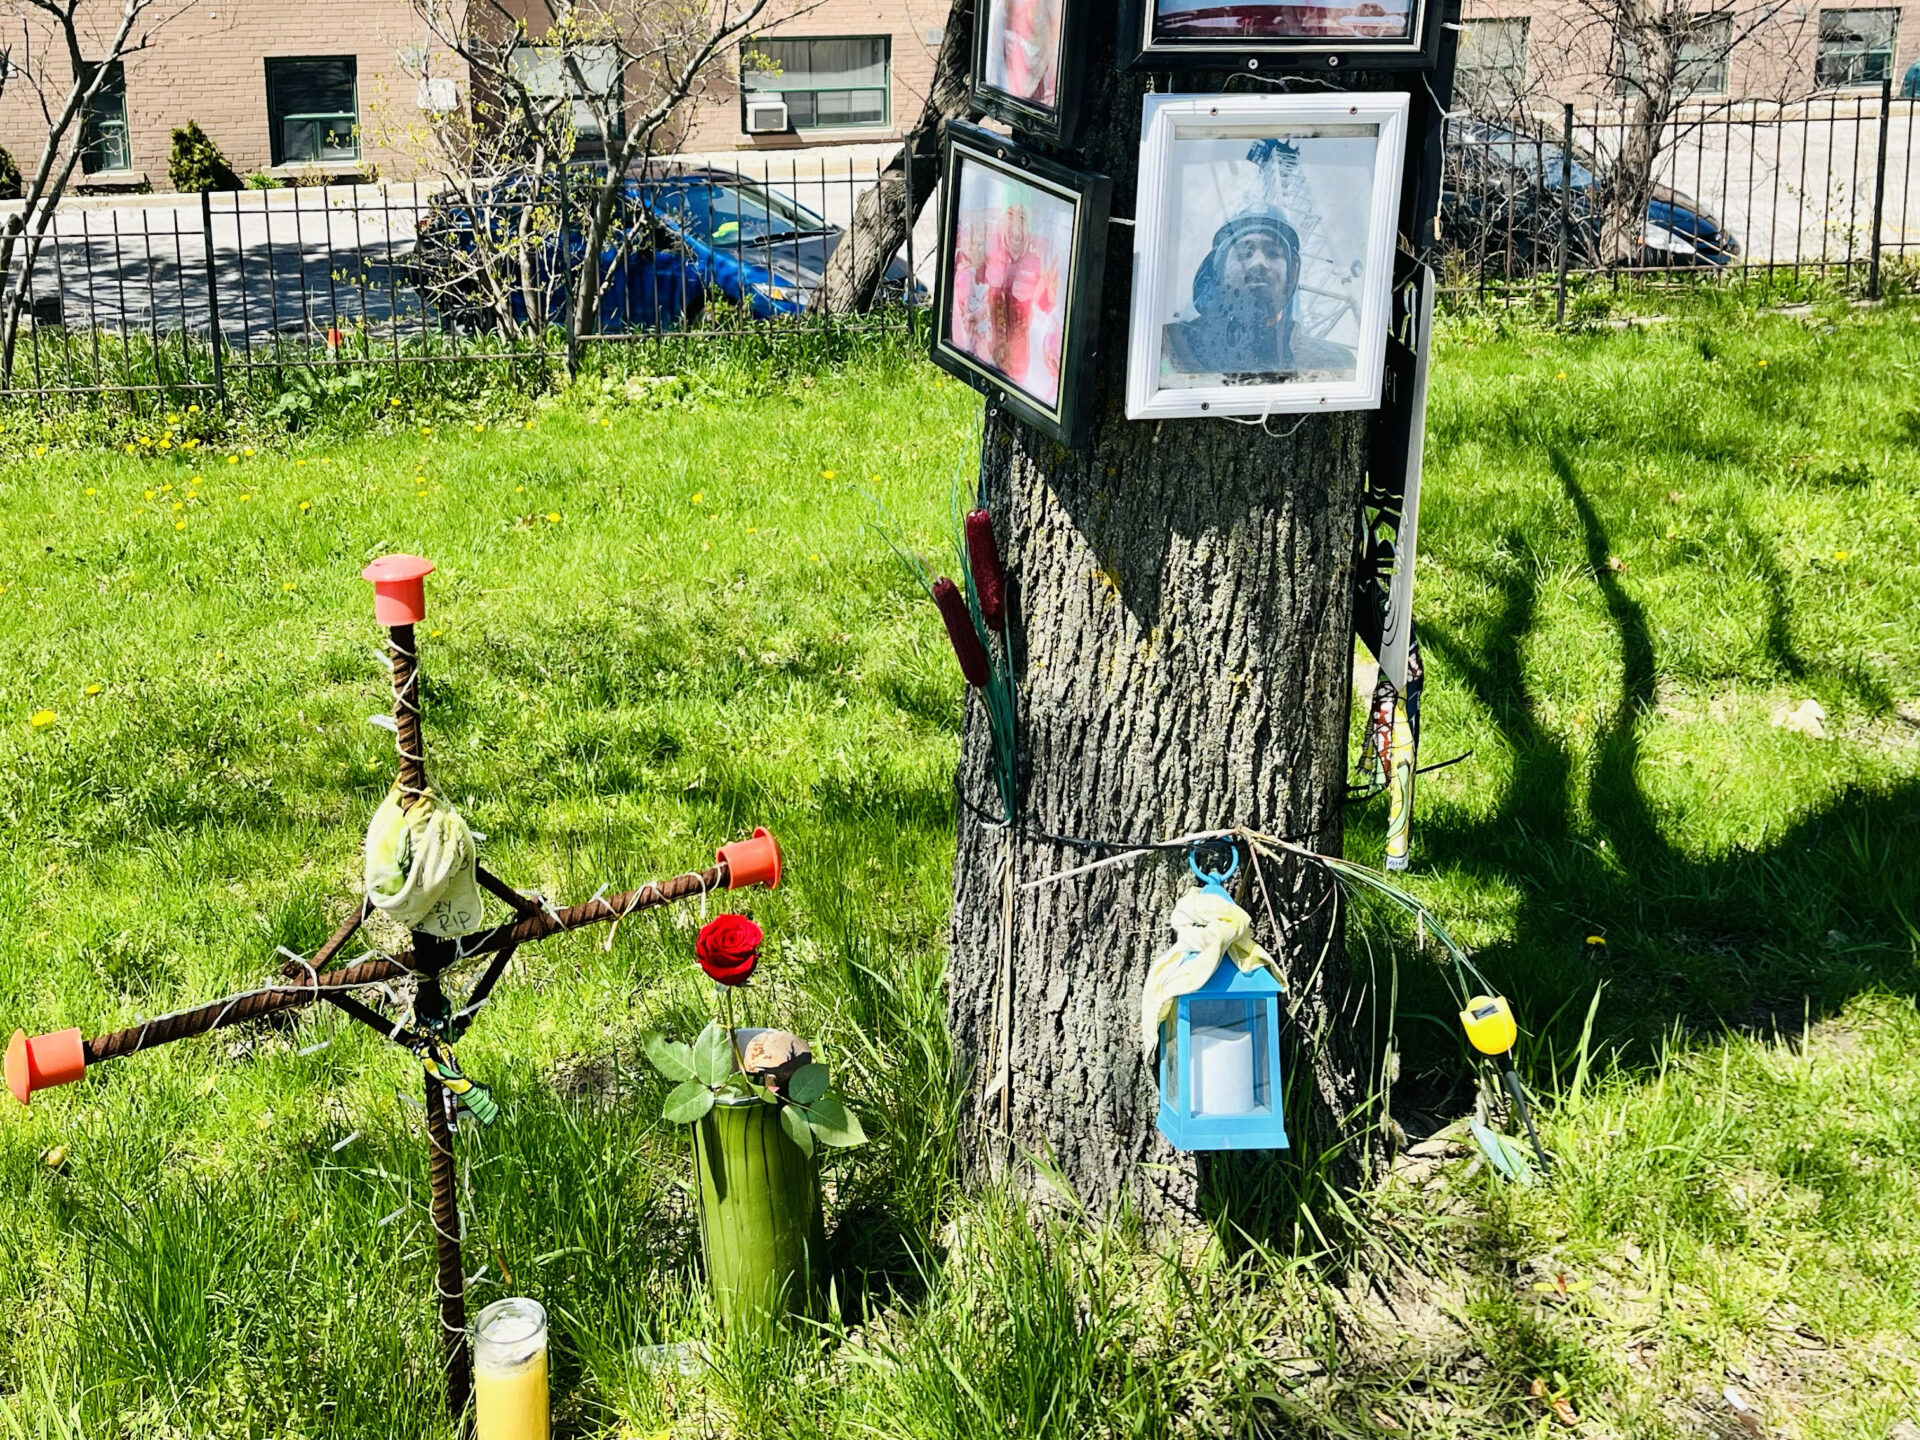 A fenced-in grassy area sits next to a street lined with cars and a brick apartment building. In the area, a mature tree stands, with framed photos of people attached to the trunk, the photos faded by the sun. A candle in a glass lantern box has been tied to the trunk, and next to it a makeshift cross stands, fashioned out of lengths of rebar, with plastic orange stoppers at the ends. A tall candle in a glass sits at its base.    